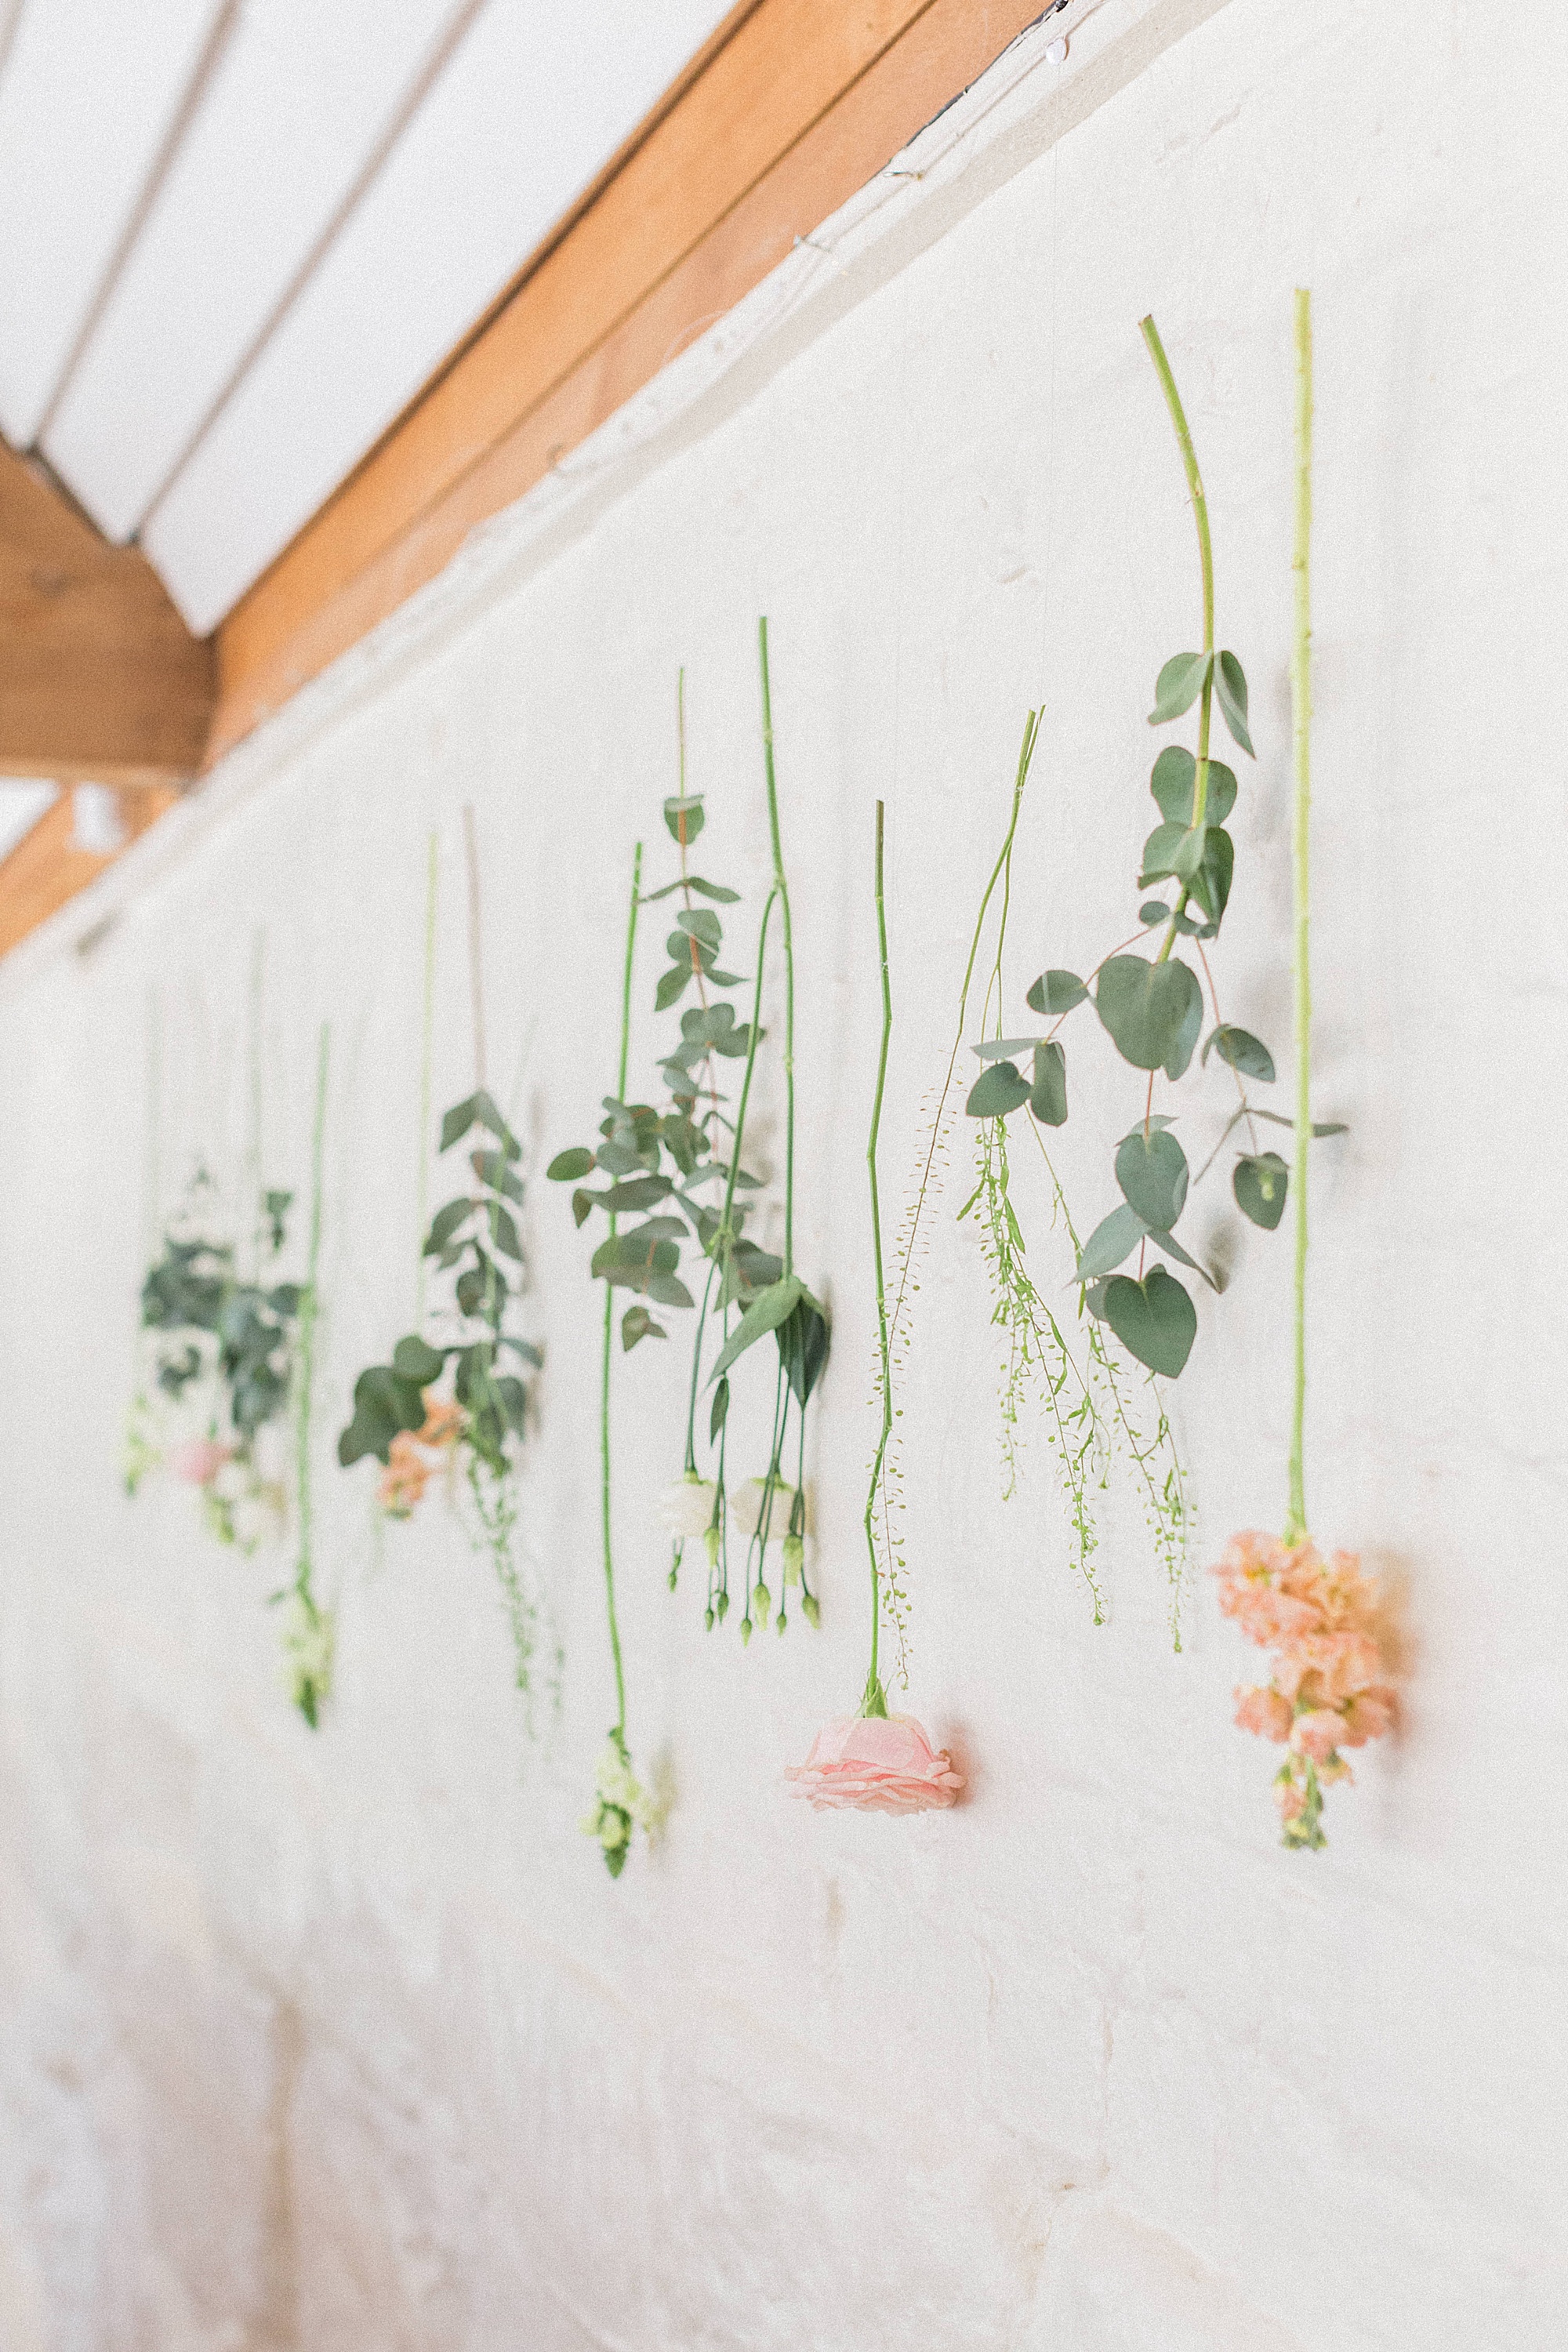 photo of a floral display with flowers hanging along a wall at a wedding reception 